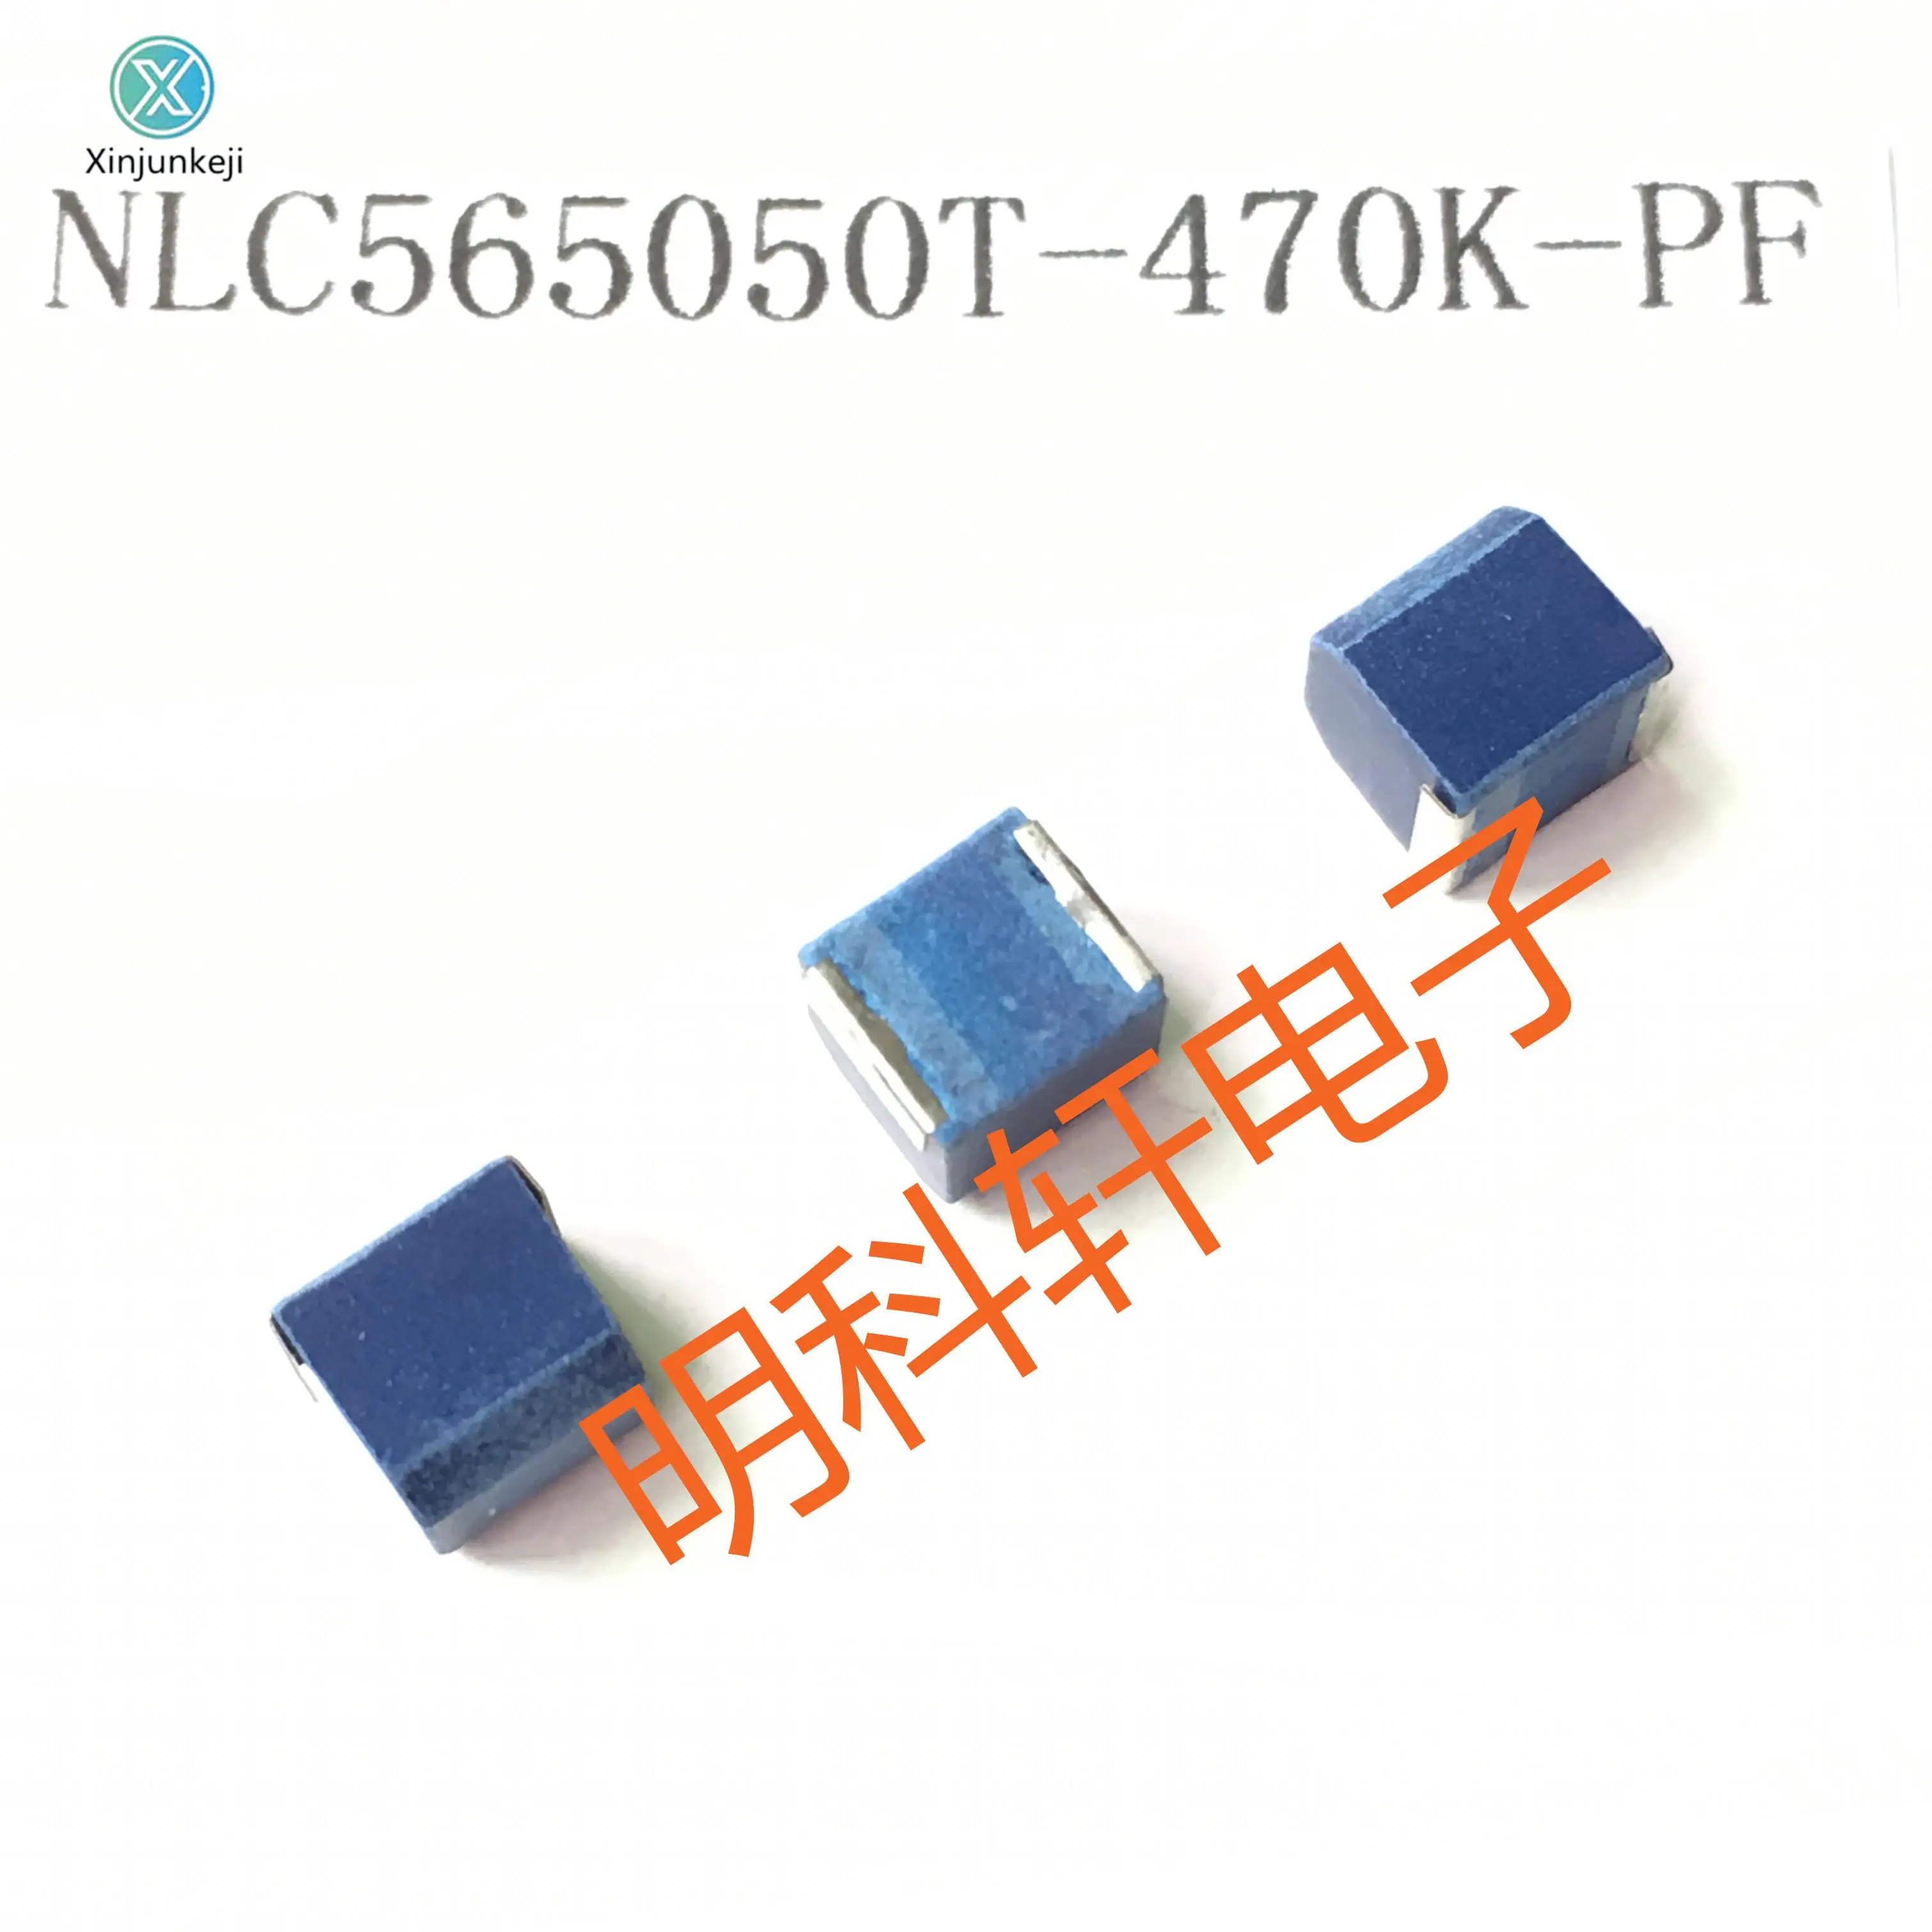 

10pcs orginal new NLC565050T-470K-PF SMD Wound Plastic Inductor 5650 2220 47UH ±10%